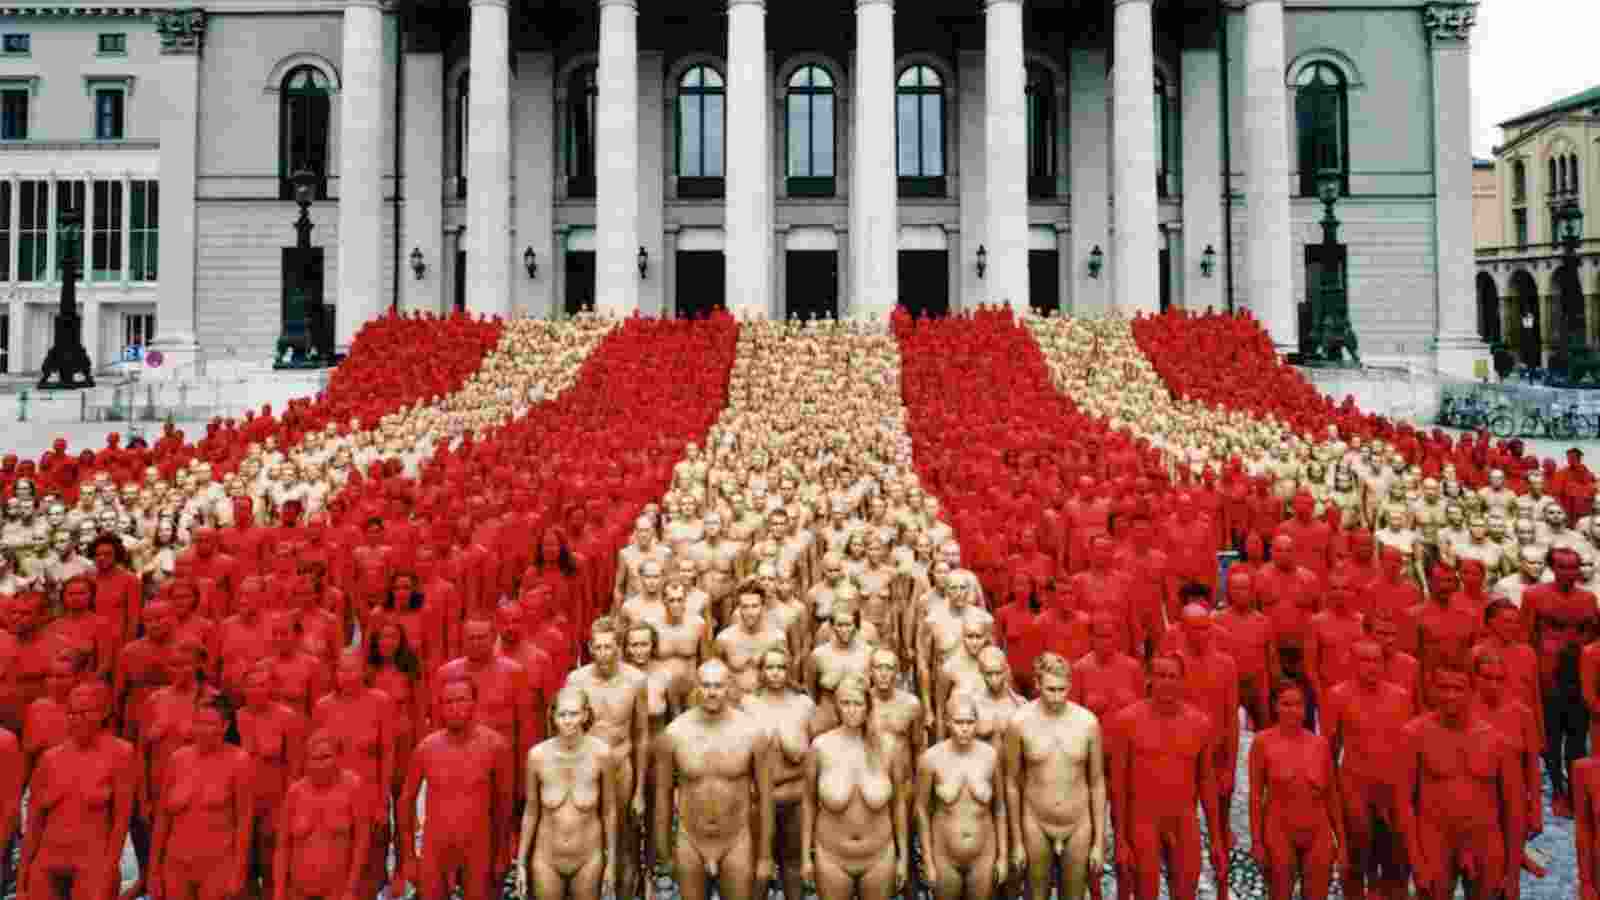 I Need People Spencer Tunick Announces His Next Mass Nude Installation In Sydney